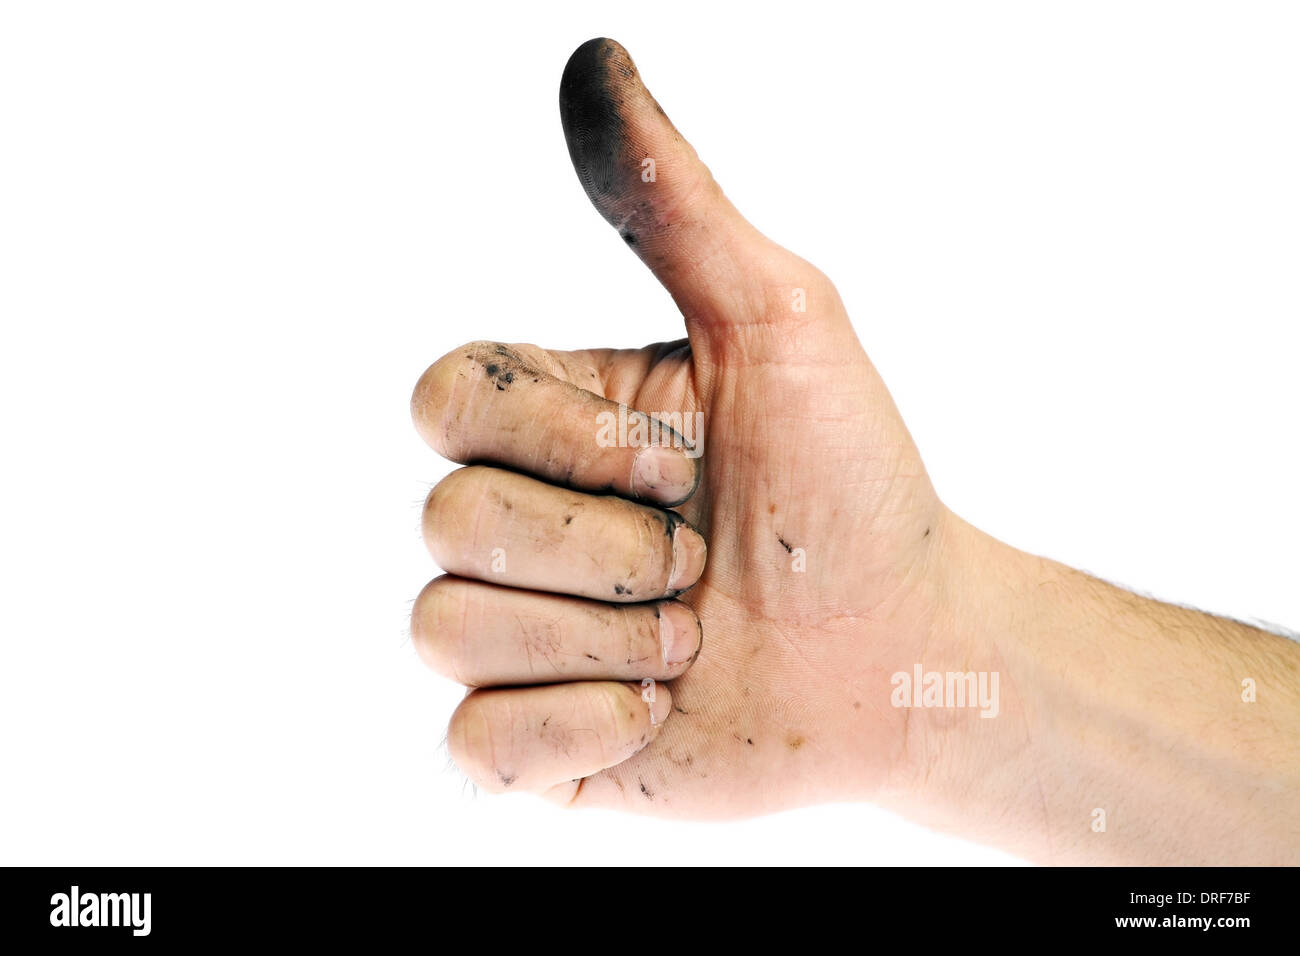 Dirty hand of a man with thumbs up Stock Photo